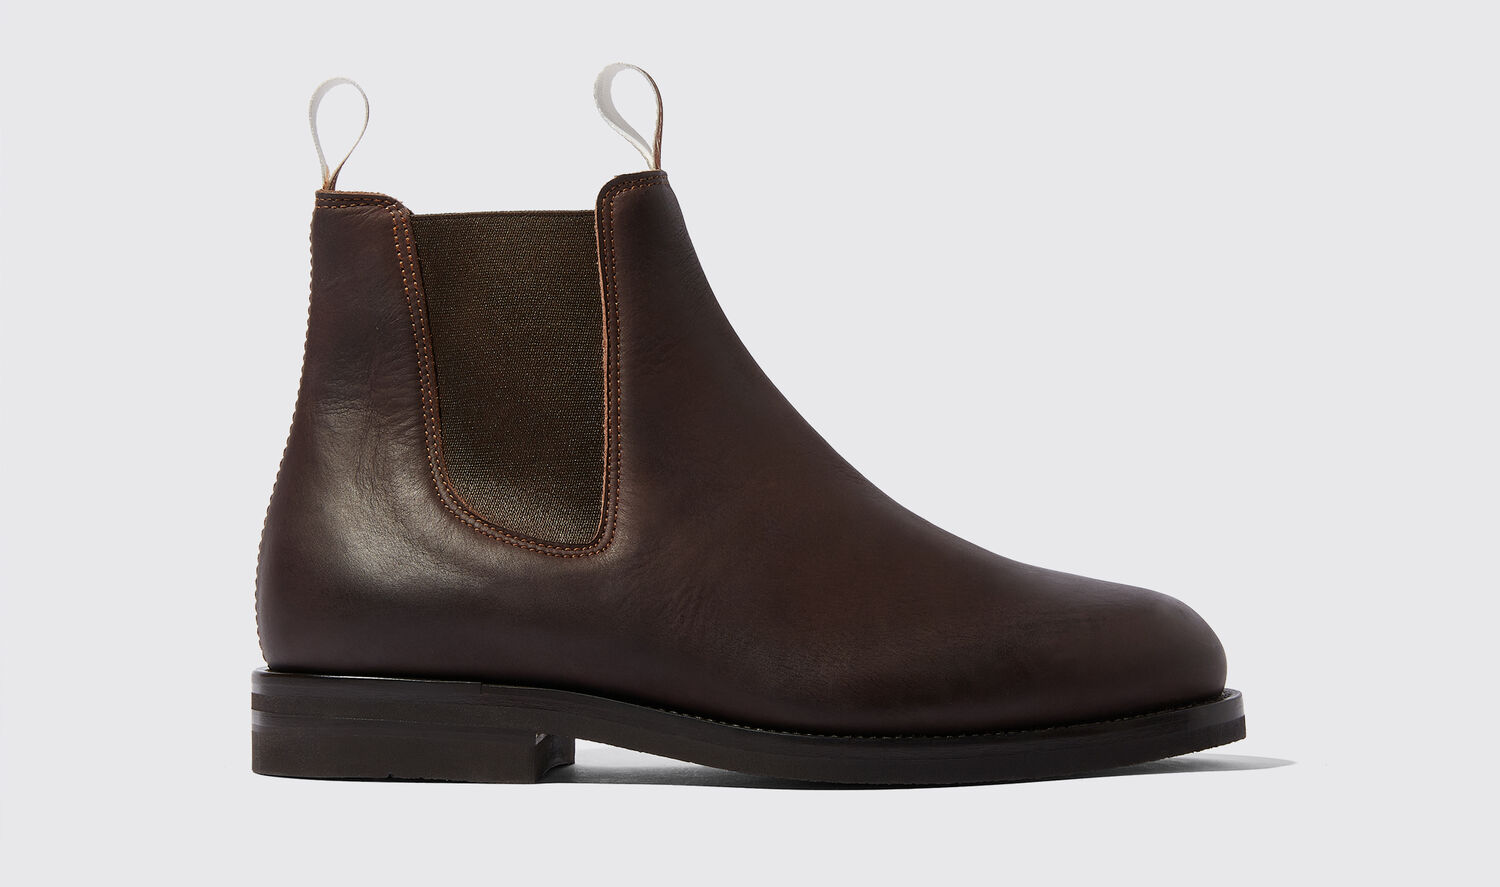 Scarosso William Iii Leather Chelsea Boots In Brown - Calf